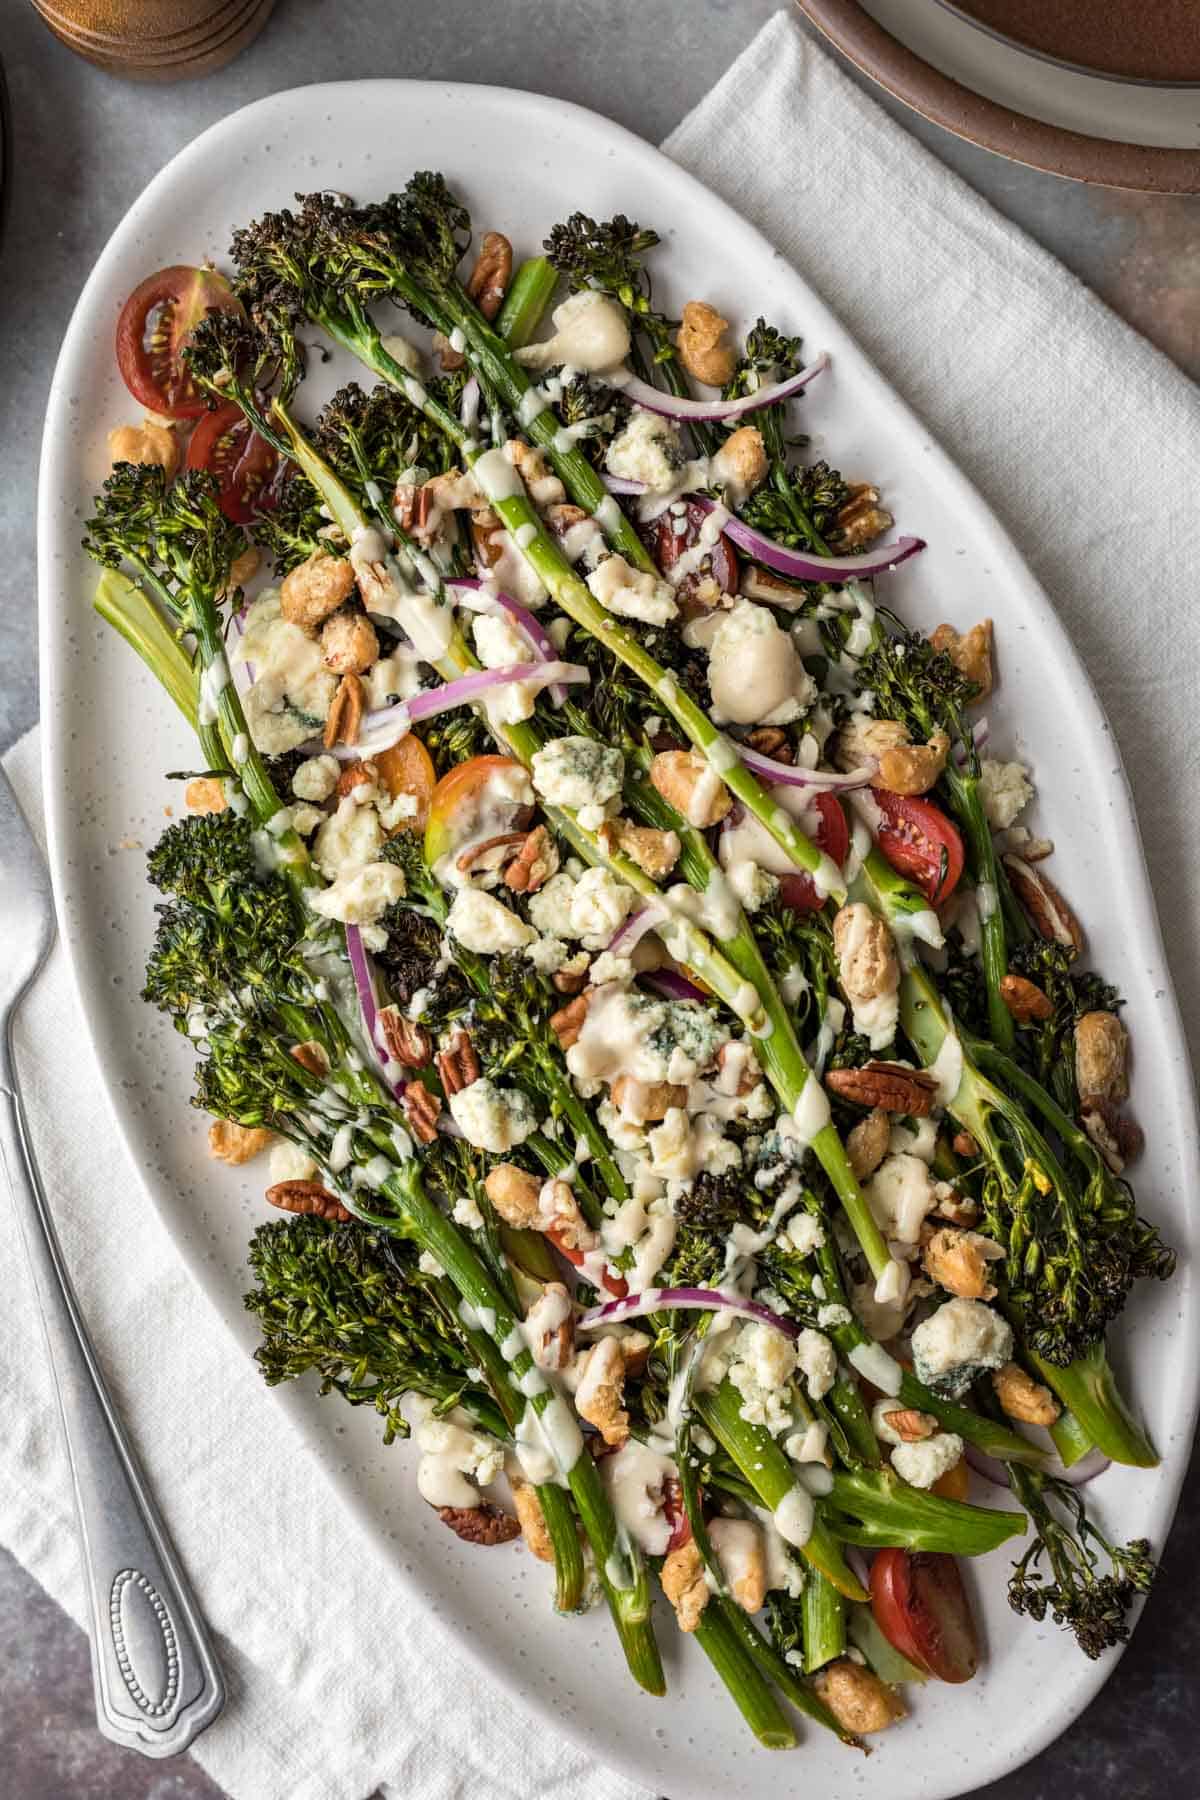 Broccolini salad with vegan blue cheese and tahini dressing on a serving platter.